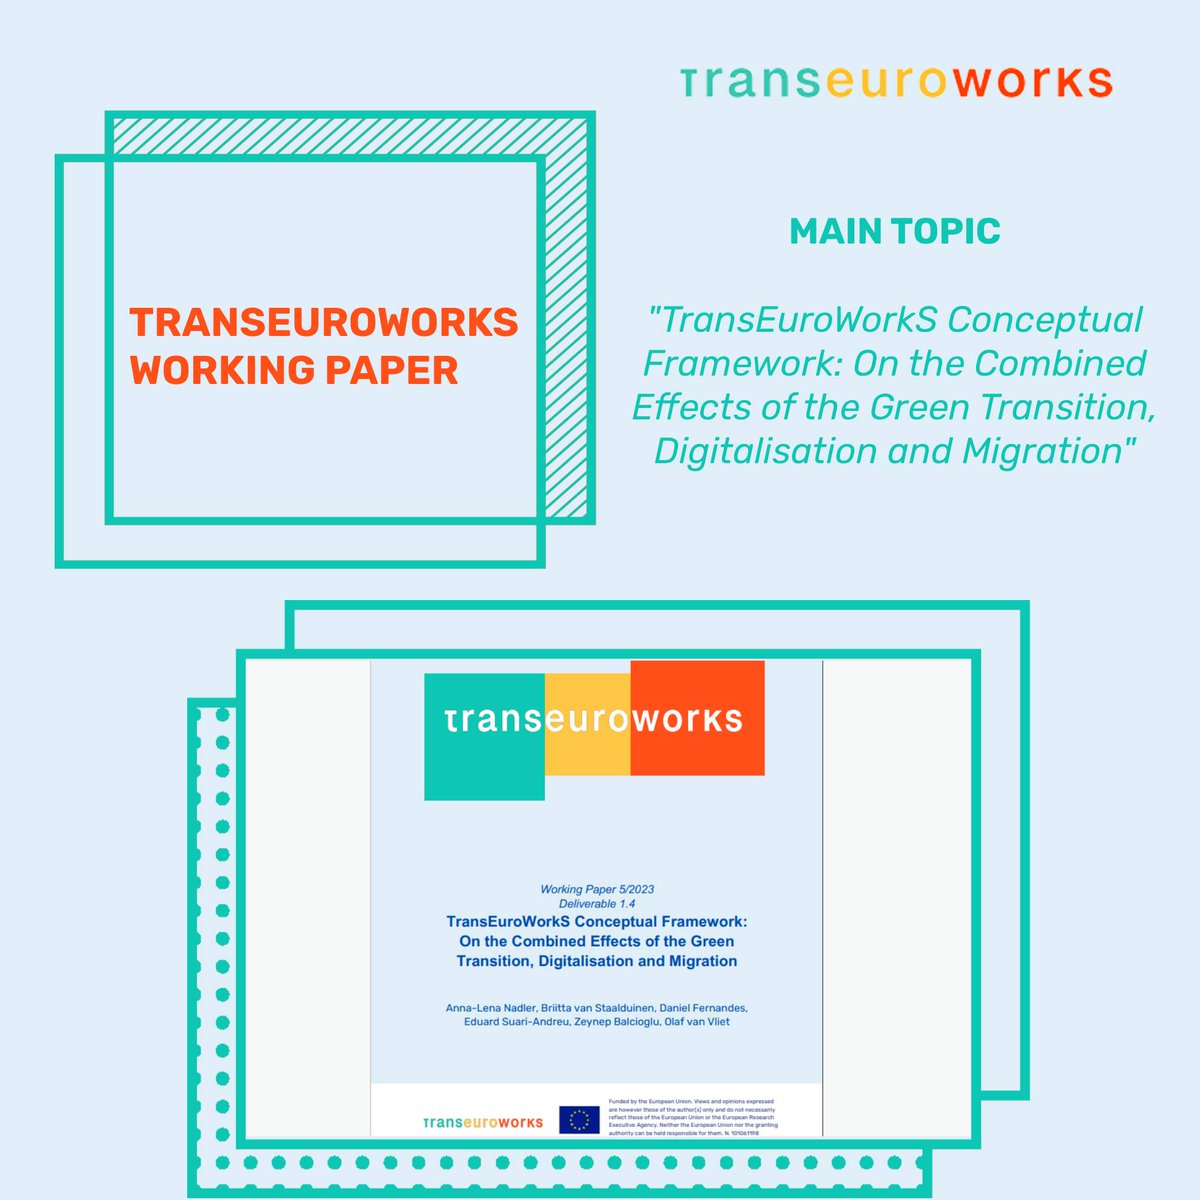 A new @transeuroworks Working Paper is out!💥 Read our paper on 'TransEuroWorkS Conceptual Framework: On the Combined Effects of the #GreenTransition, #Digitalisation, and #Migration' authored by our partners from the @EconomicsLeiden! 👉transeuroworks.eu/wp-content/upl…